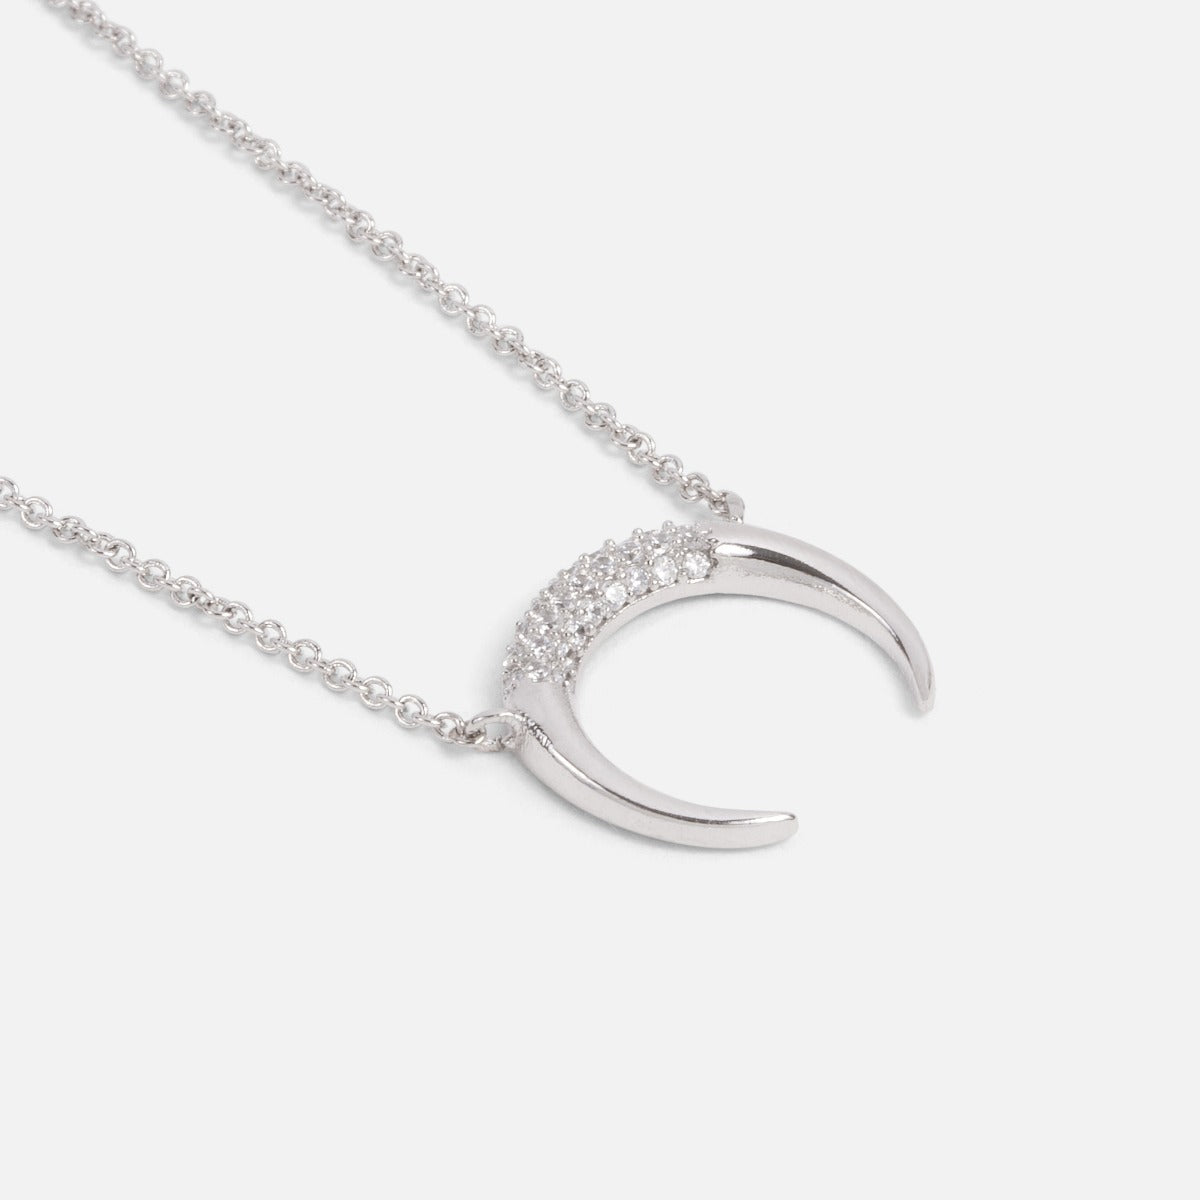 Silvered horn pendant with small cubic zirconia stones